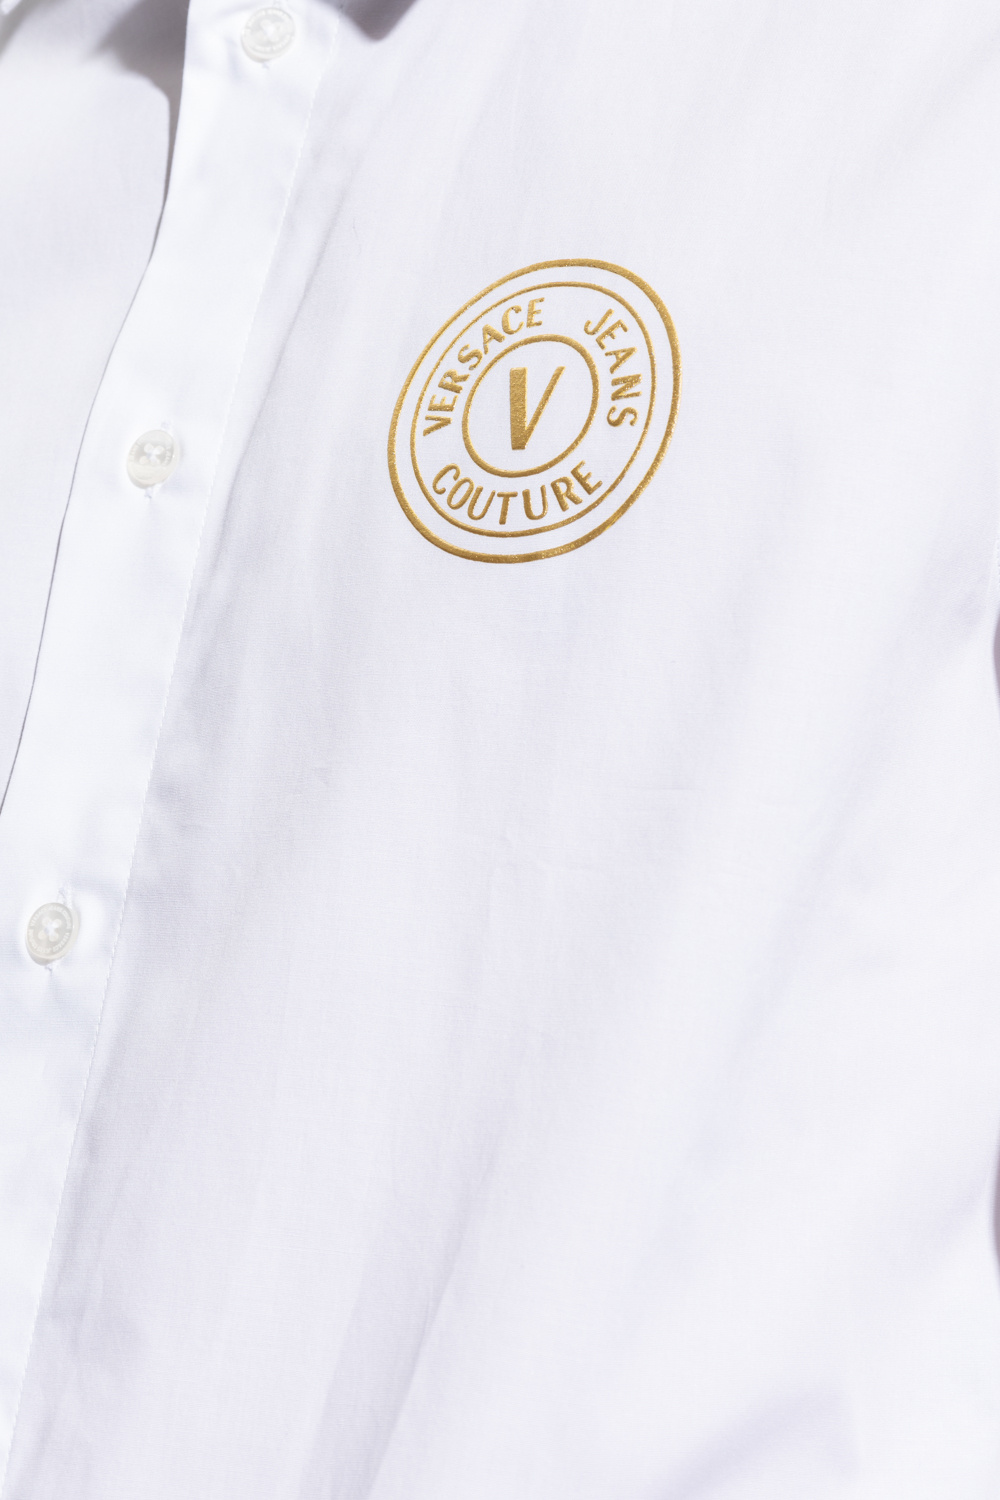 Versace Jeans Couture shirt 2Tones with logo